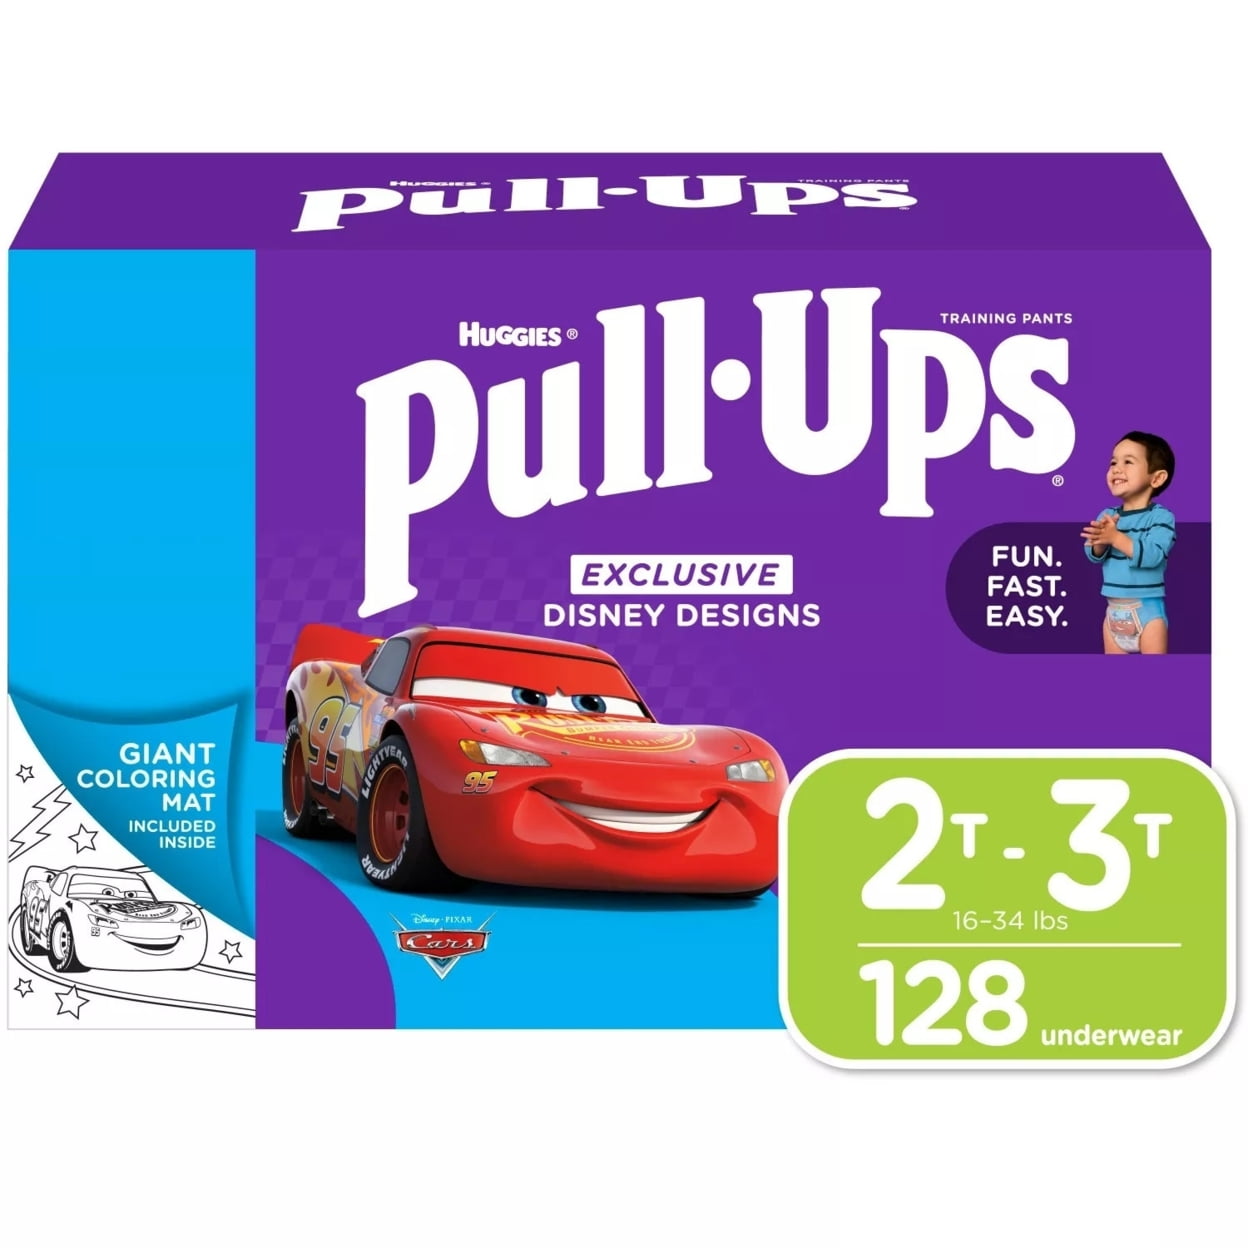 Pampers Easy Ups Training Pants Boys 2T-3T (16-34 lbs), 25 count